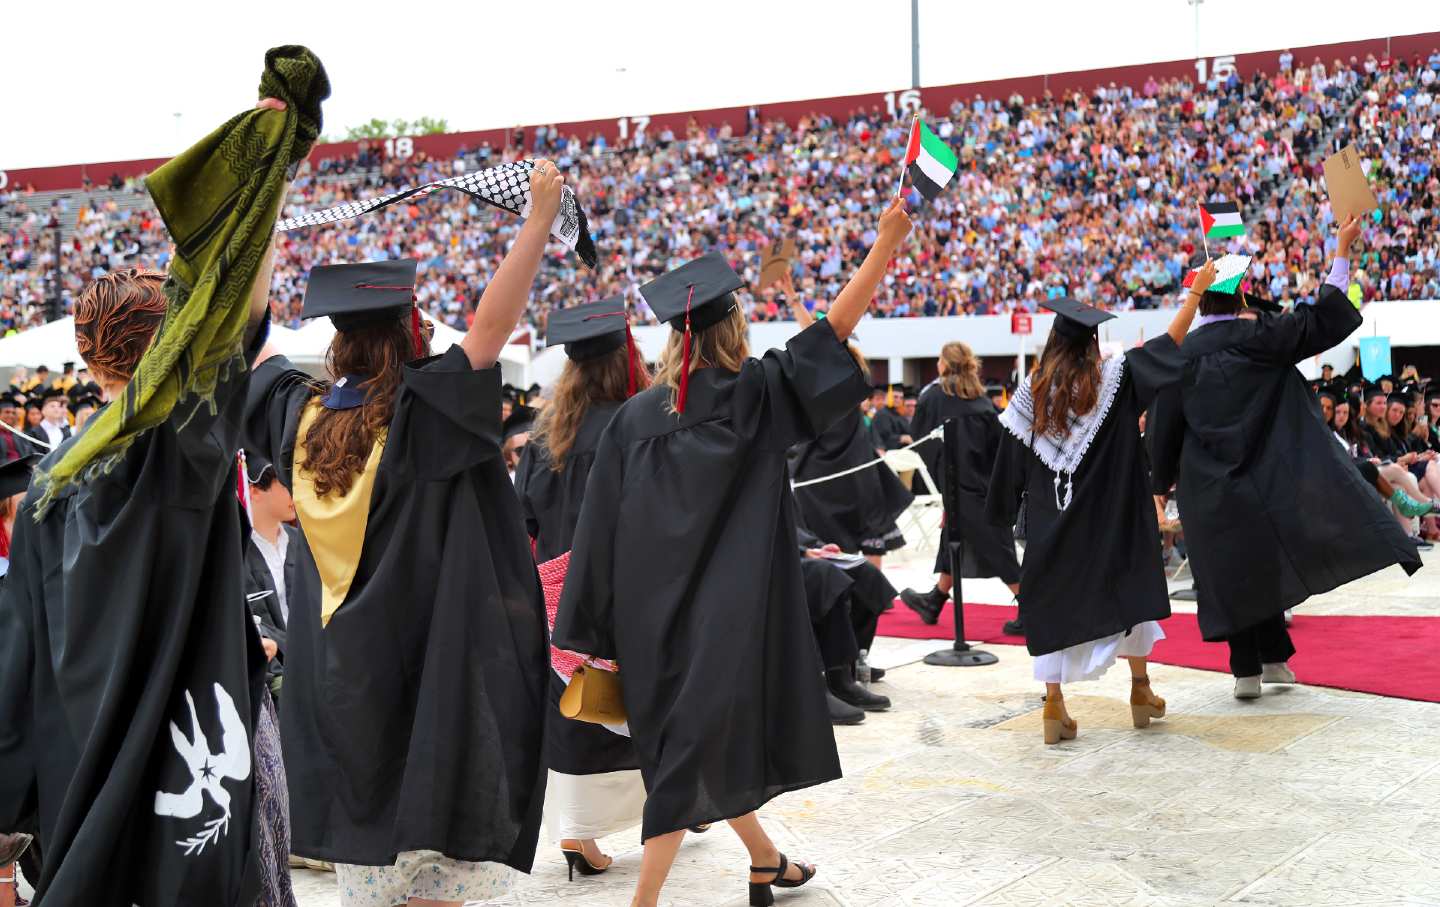 Students holding Palestinian flags and signs walk out of the UMass Amherst commencement ceremony in protest on May 18, 2024, as Chancellor Javier Reyes takes the stage to speak.